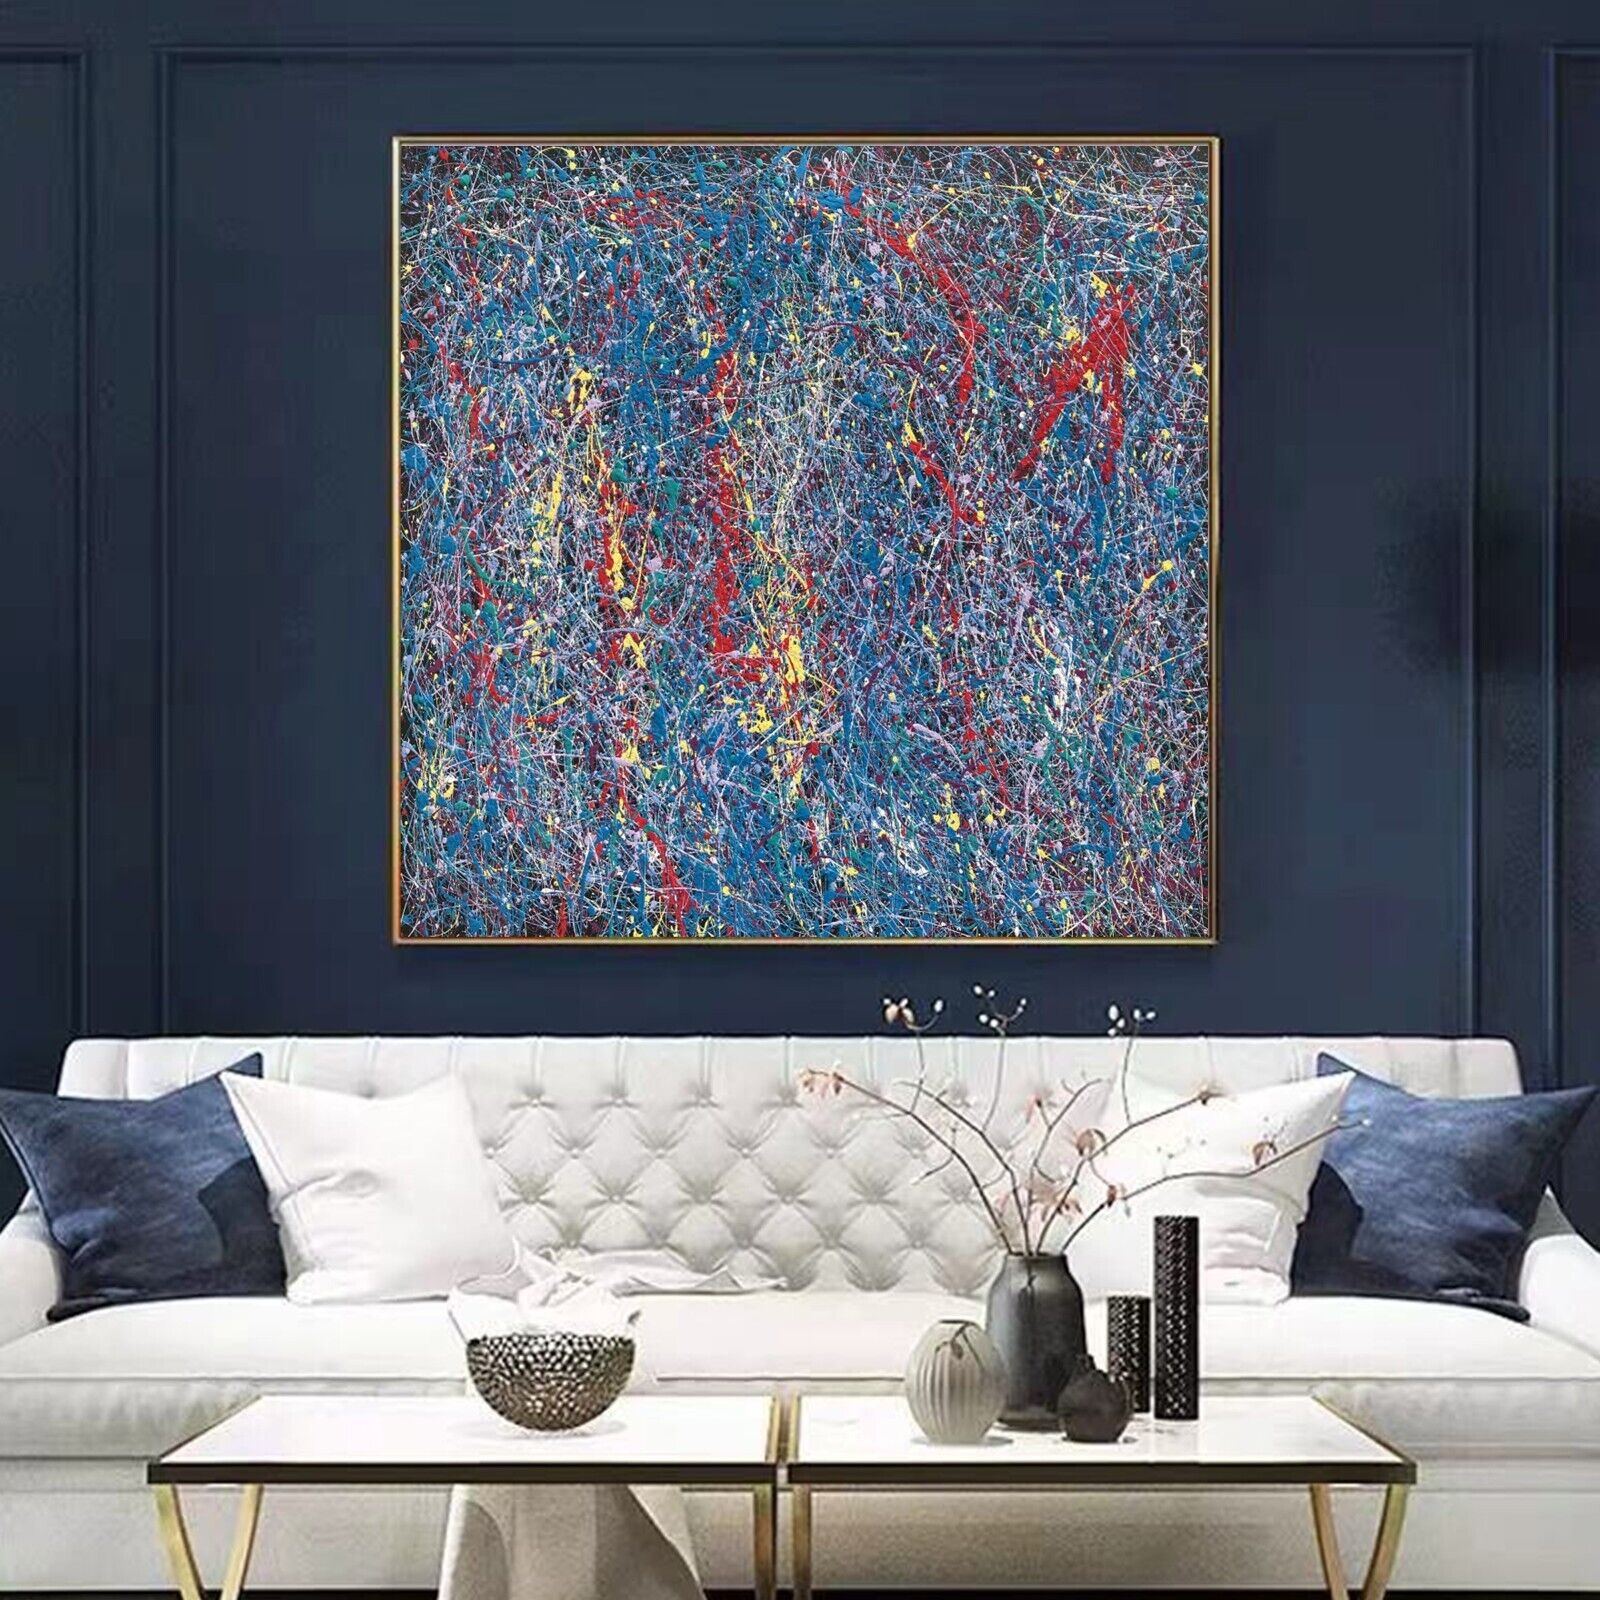 Sale Abstract Caribbean Red 36H X 24W Framed Canvas Giclee Winford $595 Now $295